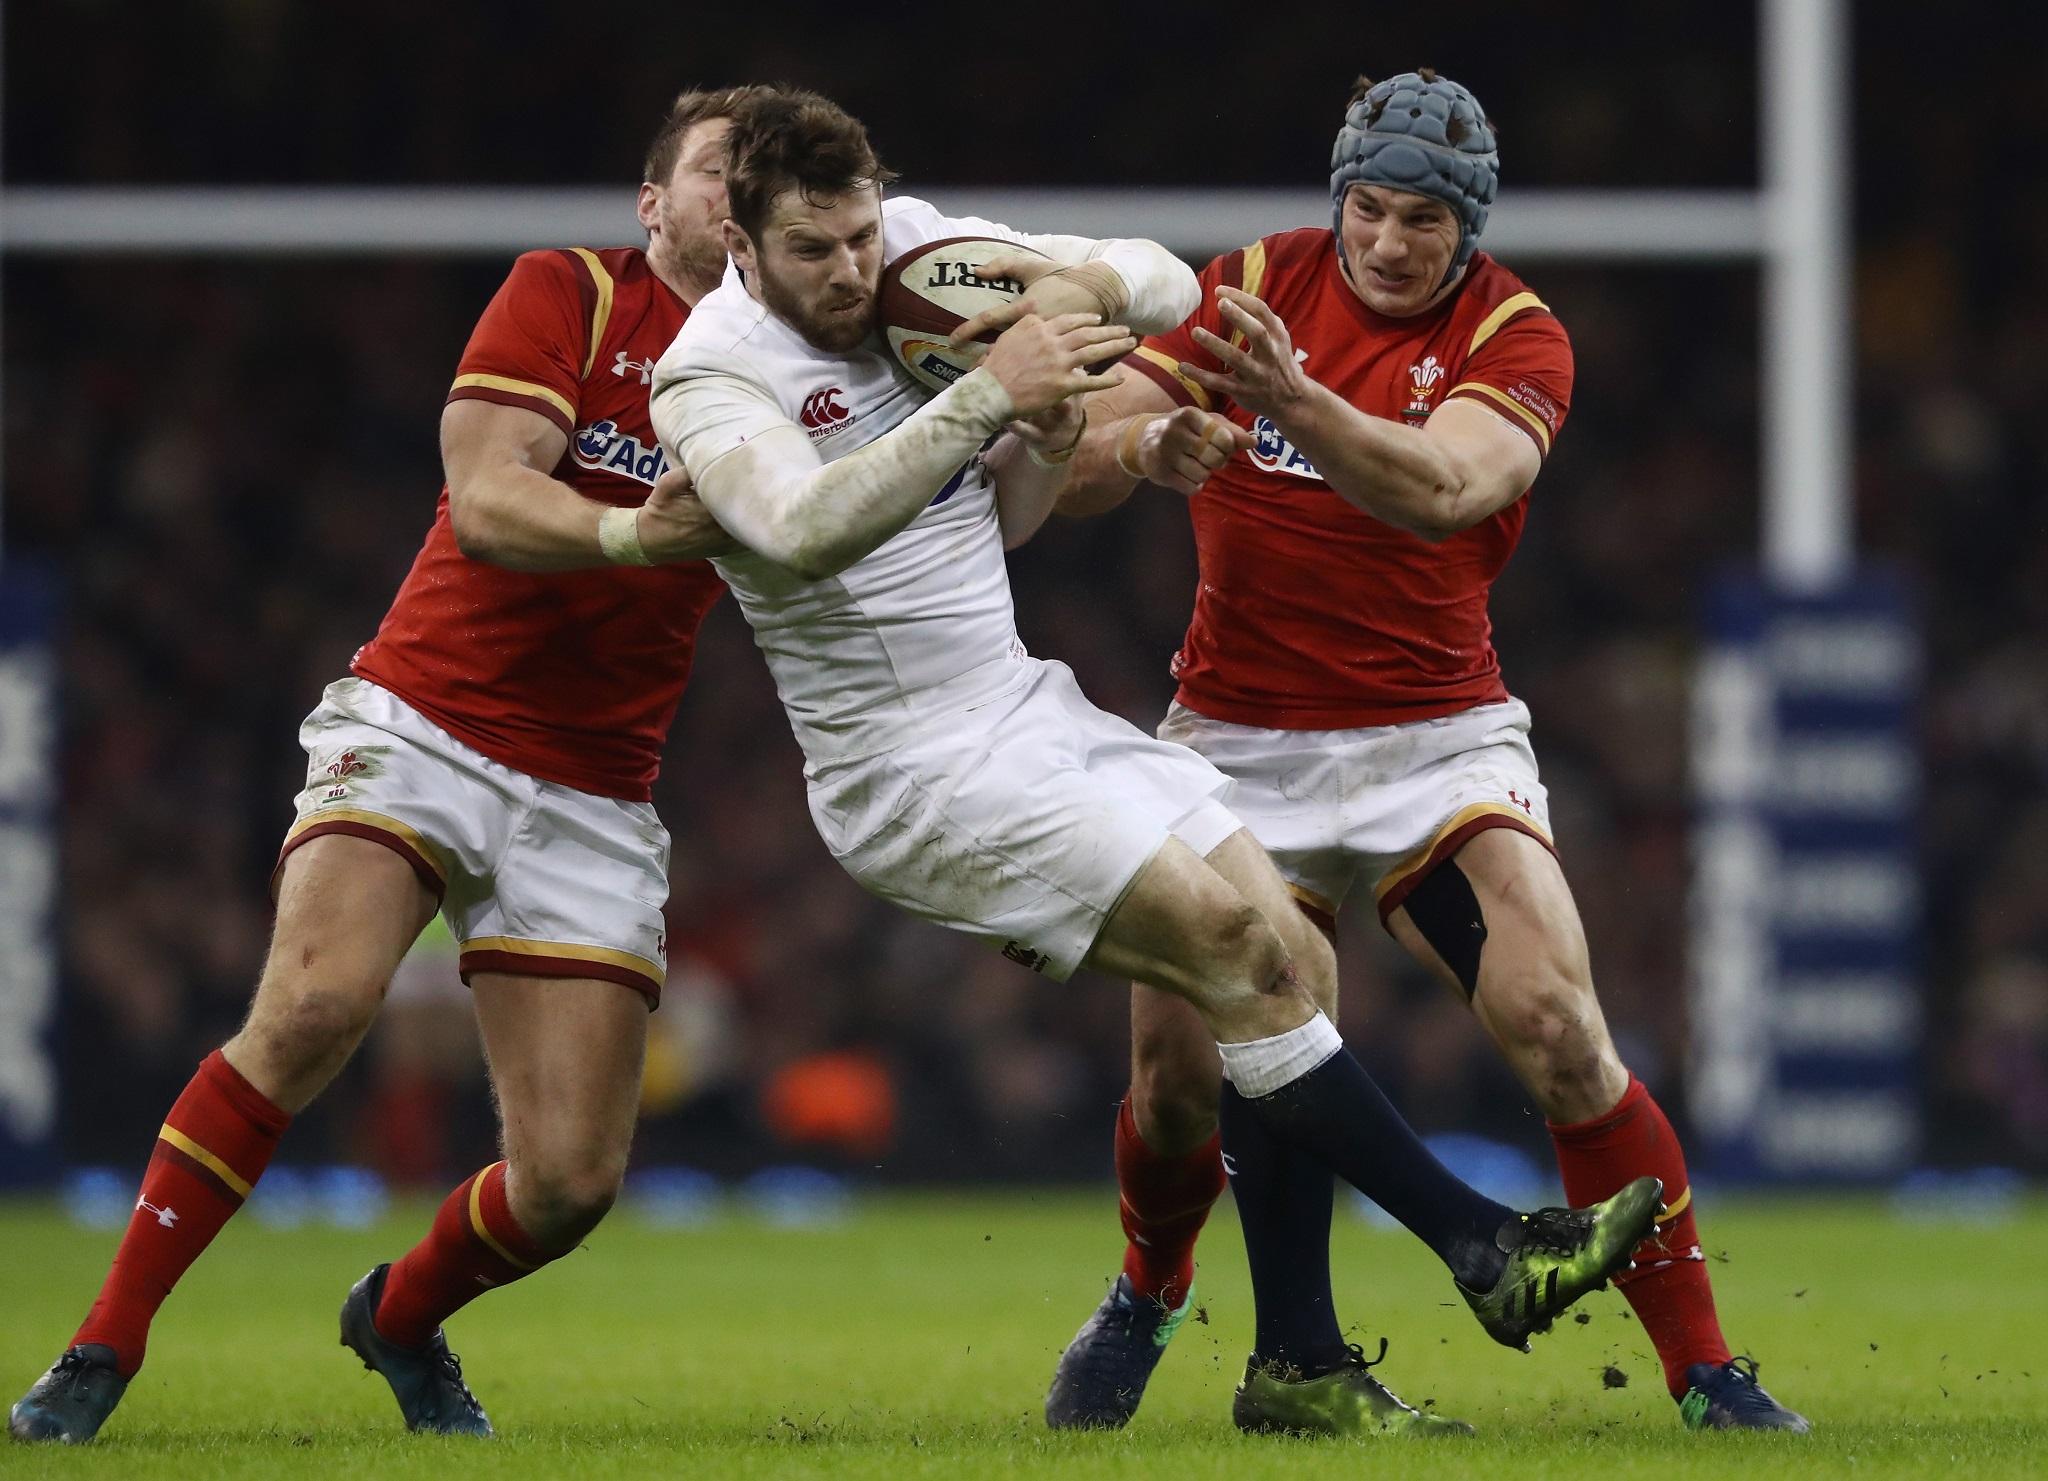 Wales vs England live Elliot Daly try salvages late victory to stretch English winning streak to 16 games The Independent The Independent